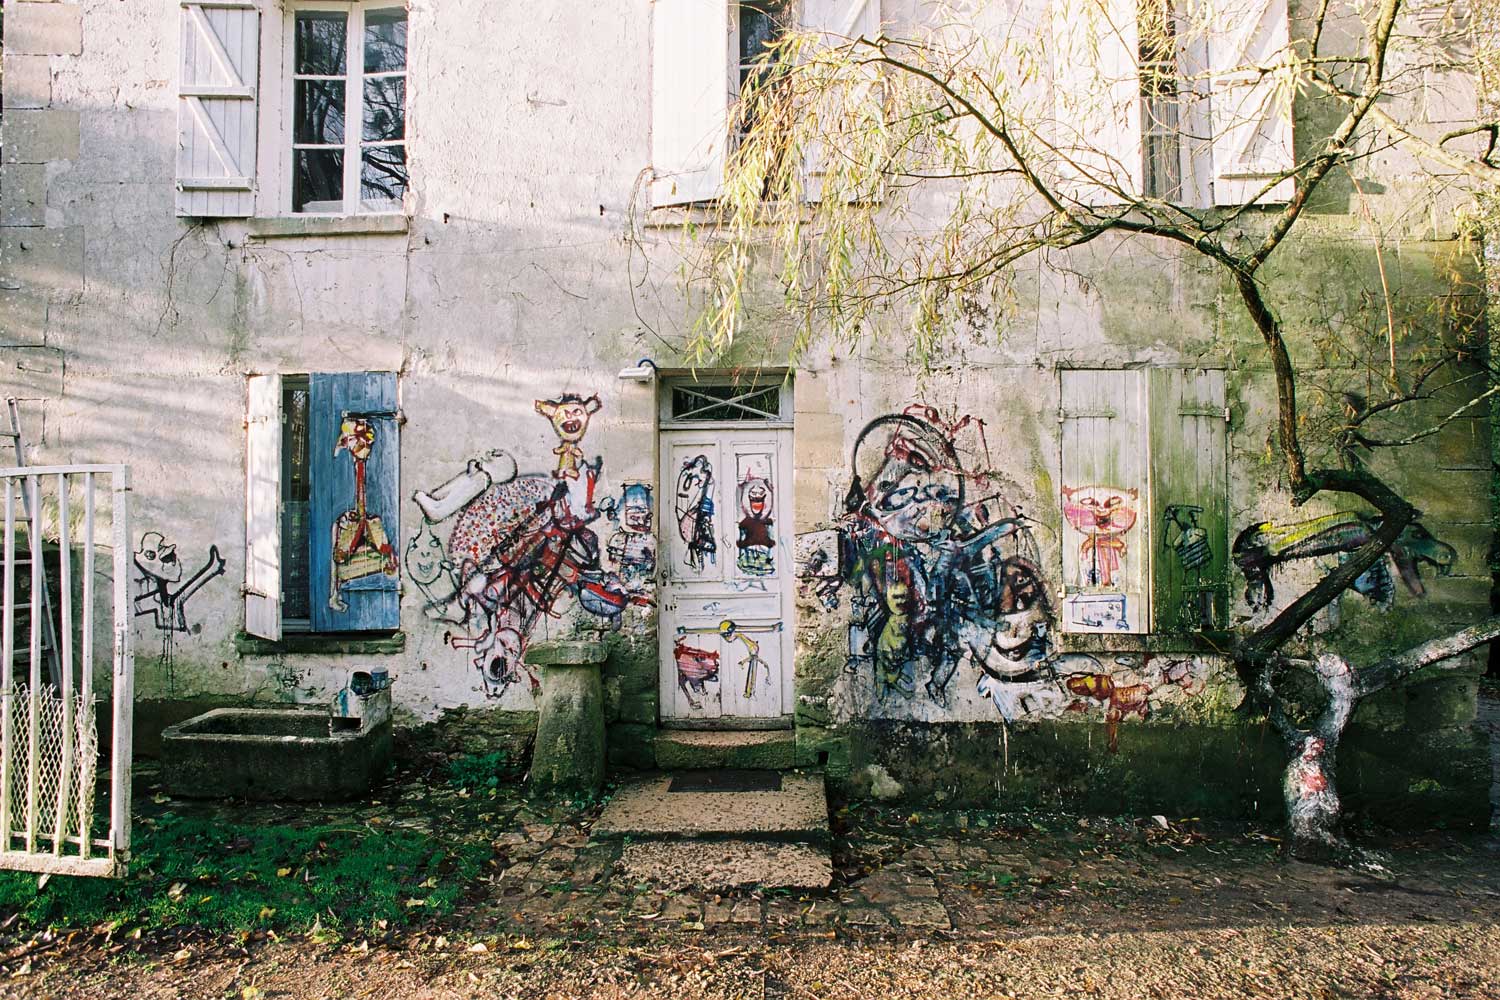 Entrance to the first building – Murals at Hérouval